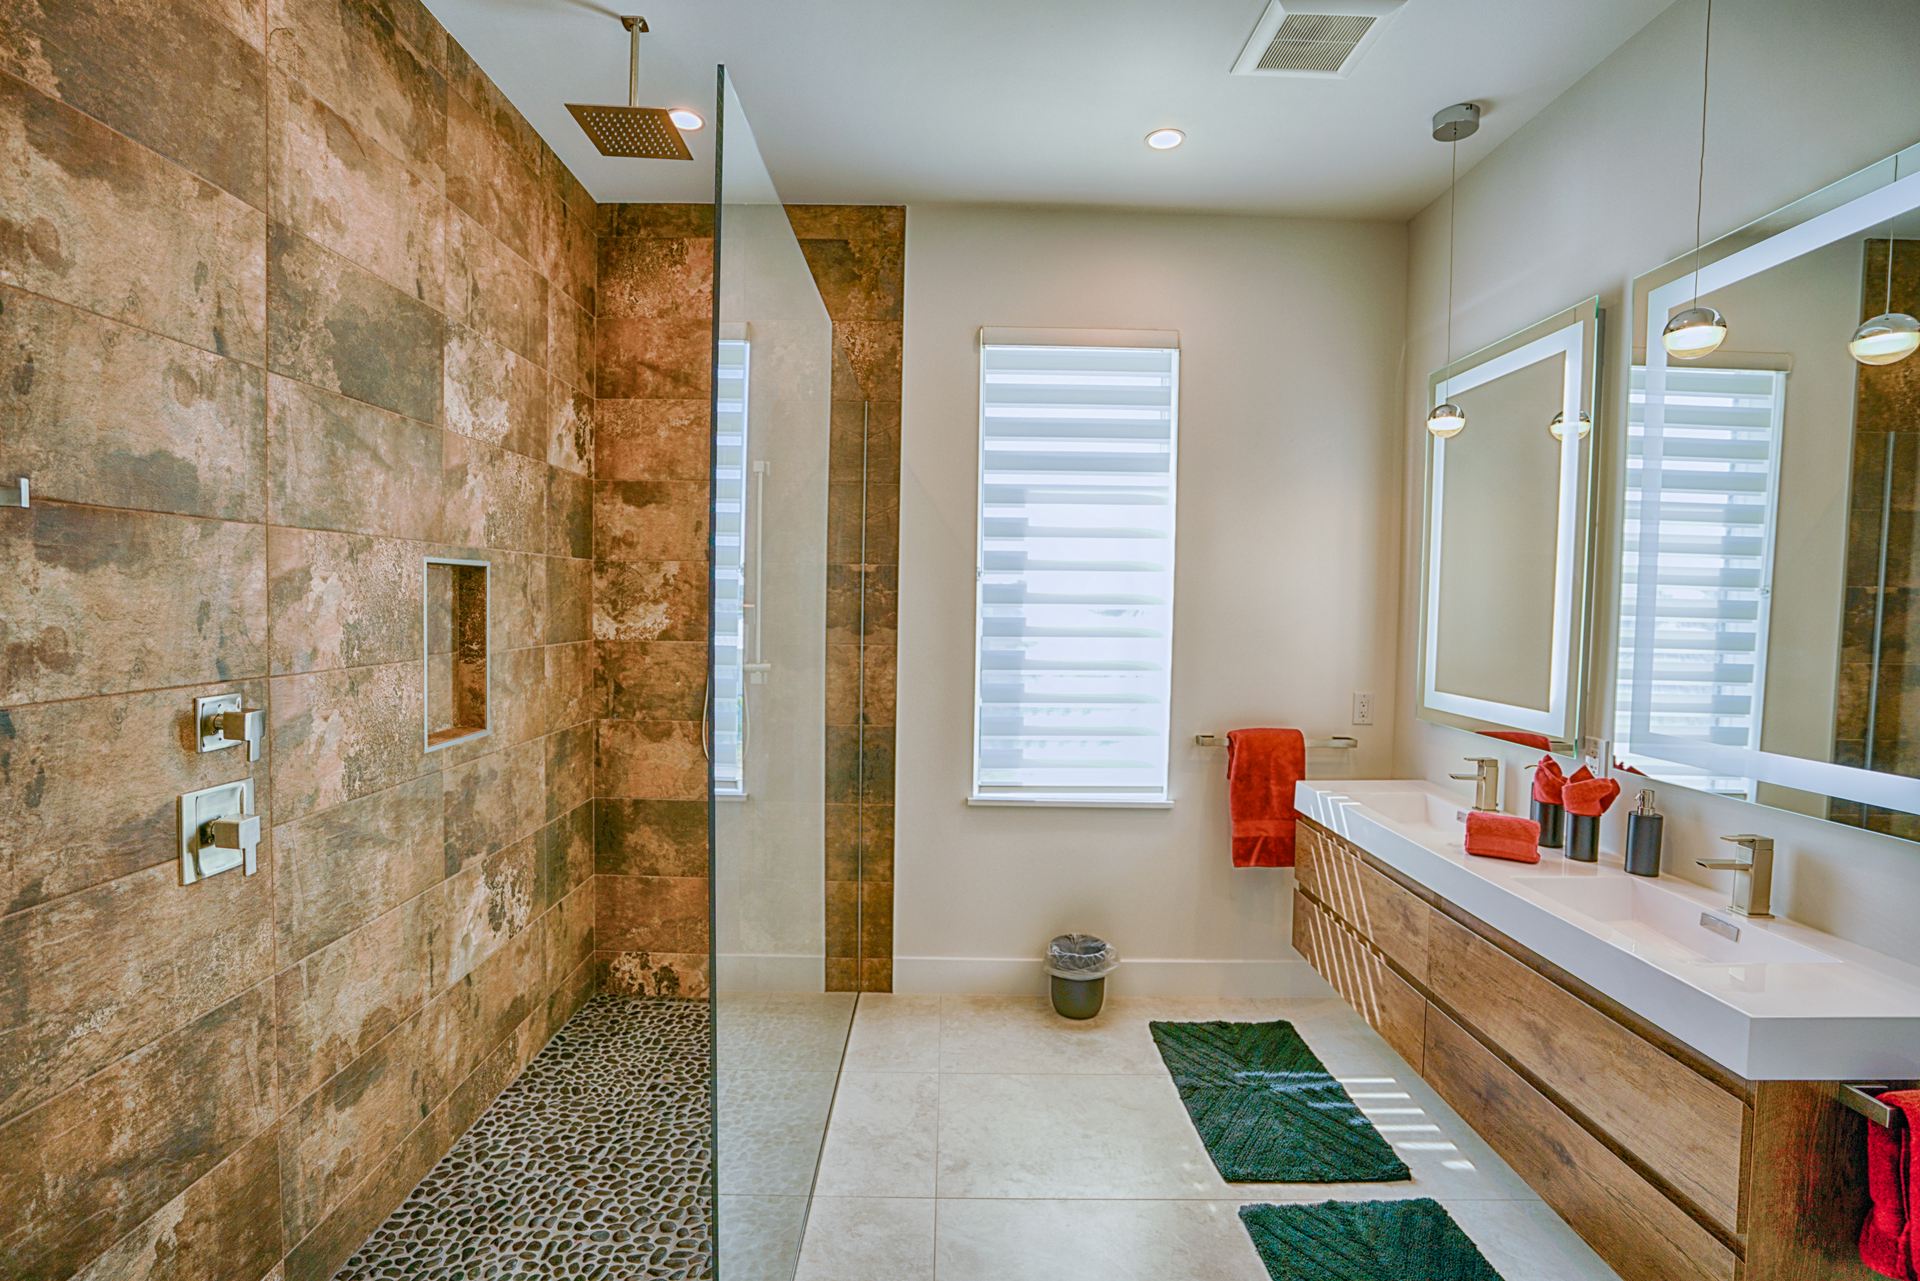 Bathrooms in the rental home